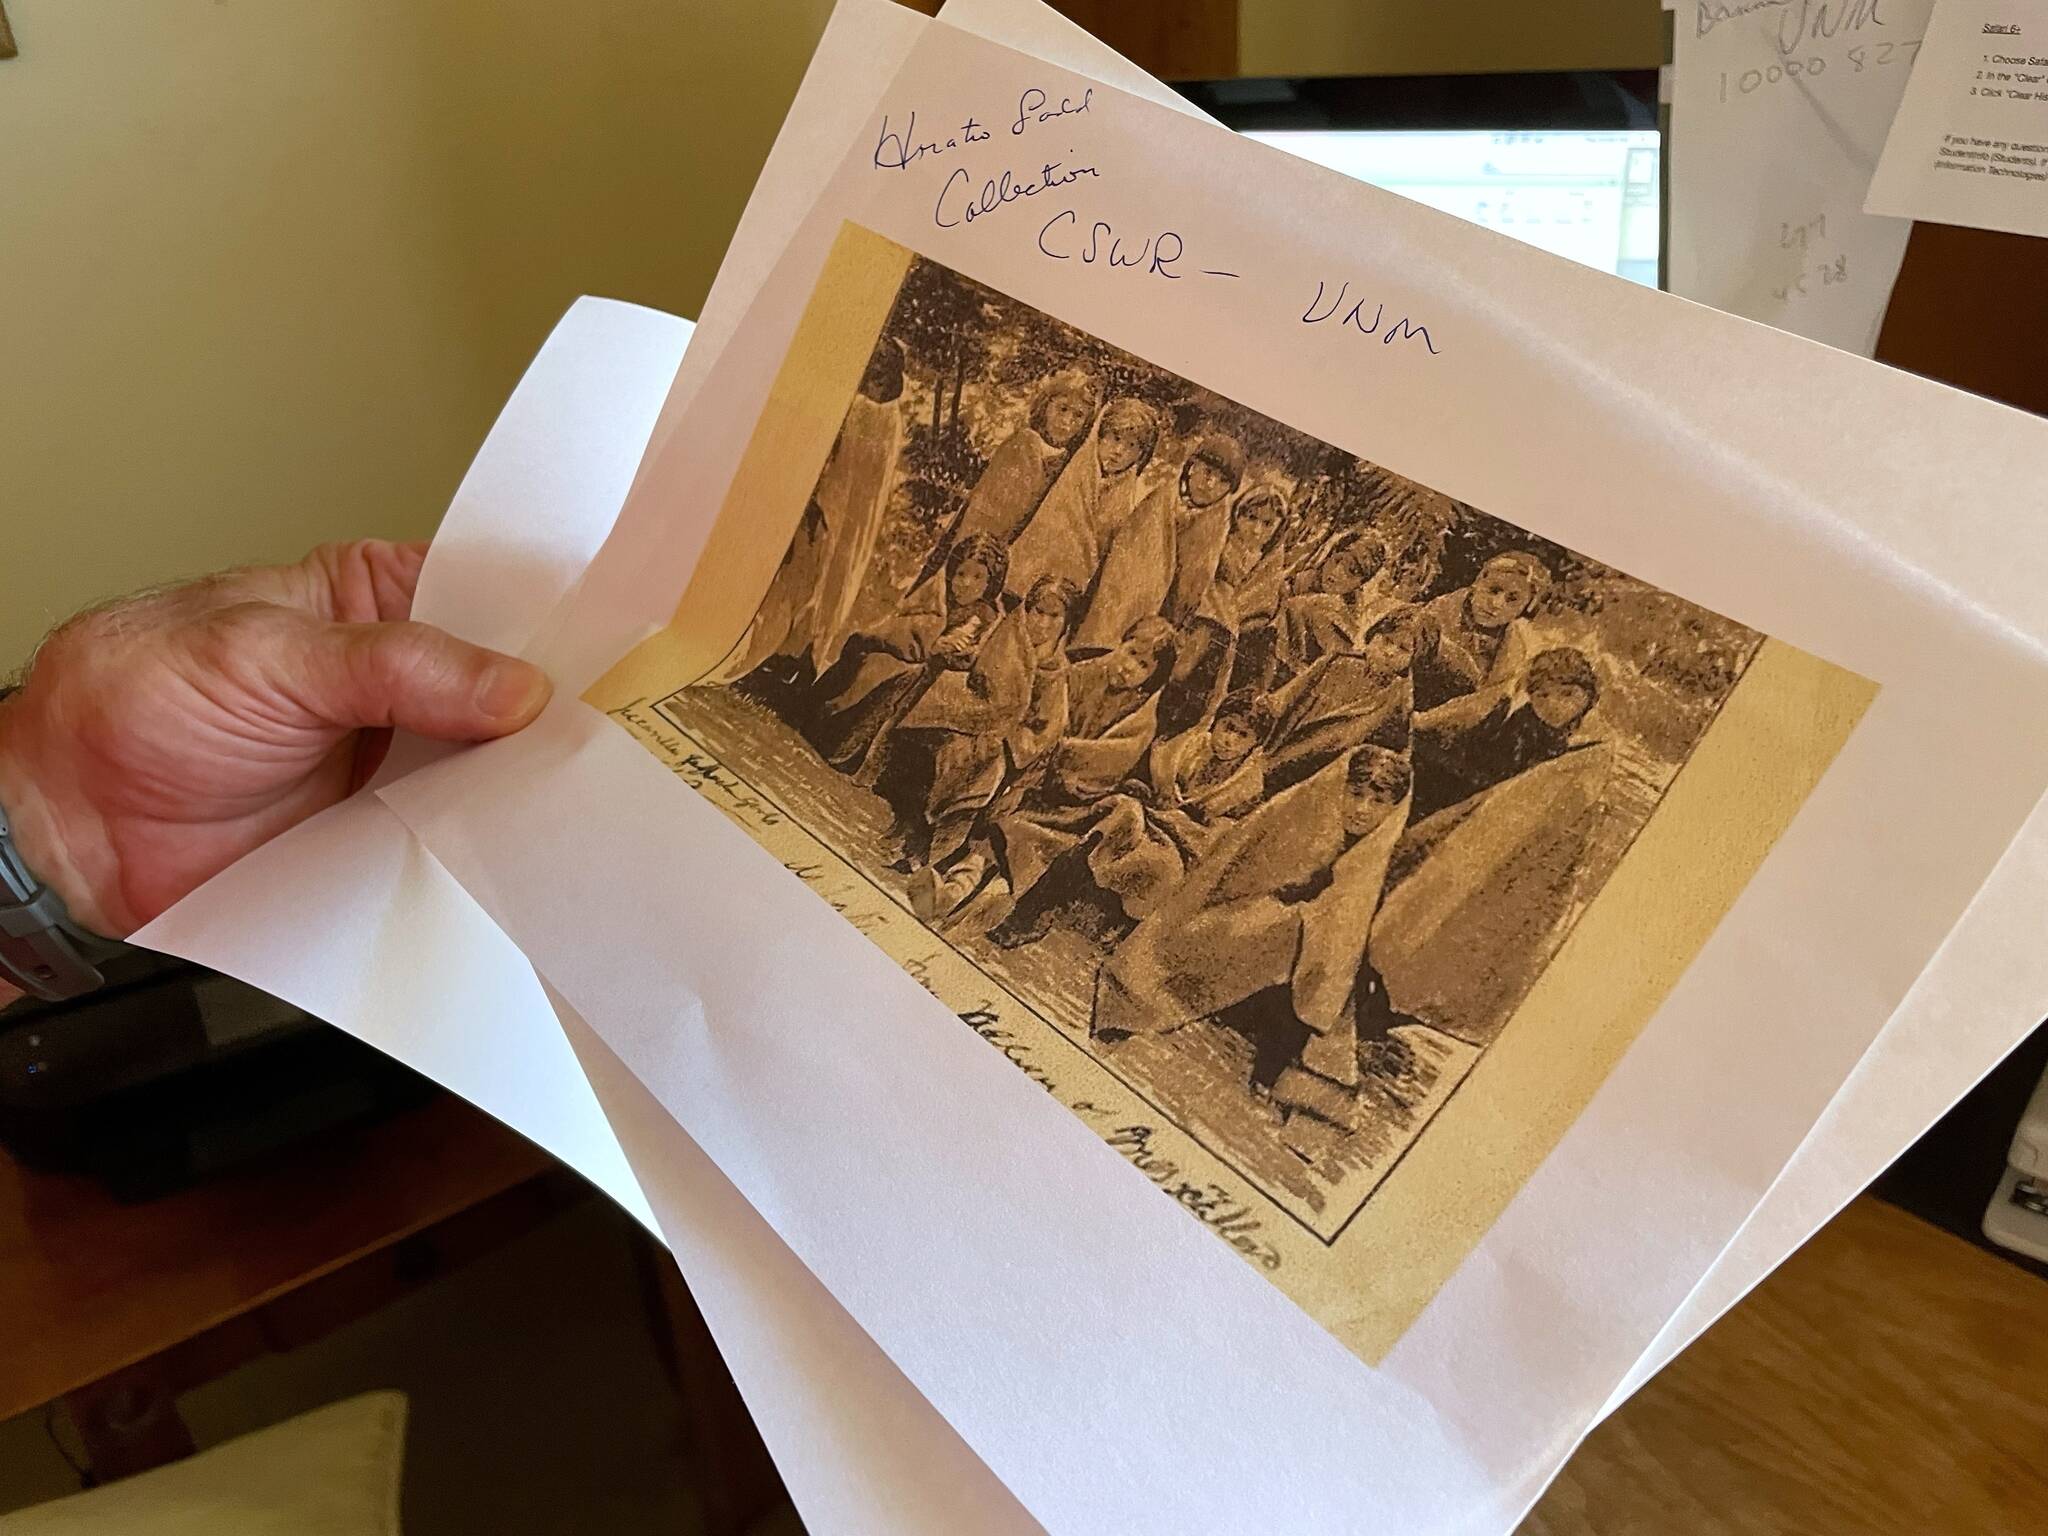 AP Photo / Susan Montoya Bryan
Adjunct history professor and research associate Larry Larrichio holds a copy of a late 19th century photograph of pupils at an Indigenous boarding school in Santa Fe during an interview July 8, 2021, in Albuquerque, New Mexico.